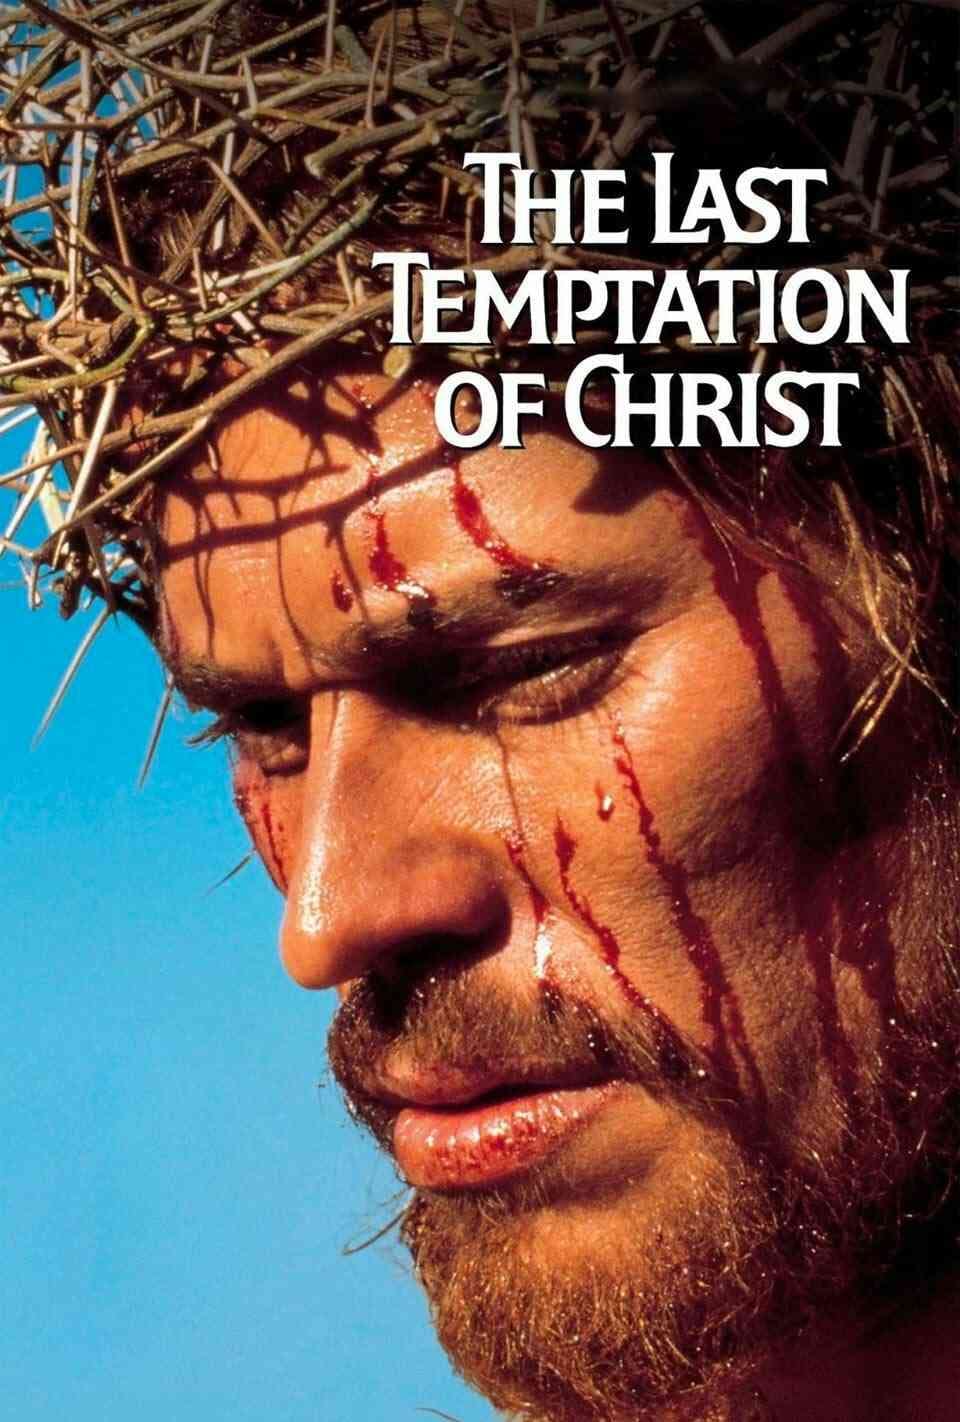 Read The Last Temptation of Christ screenplay (poster)